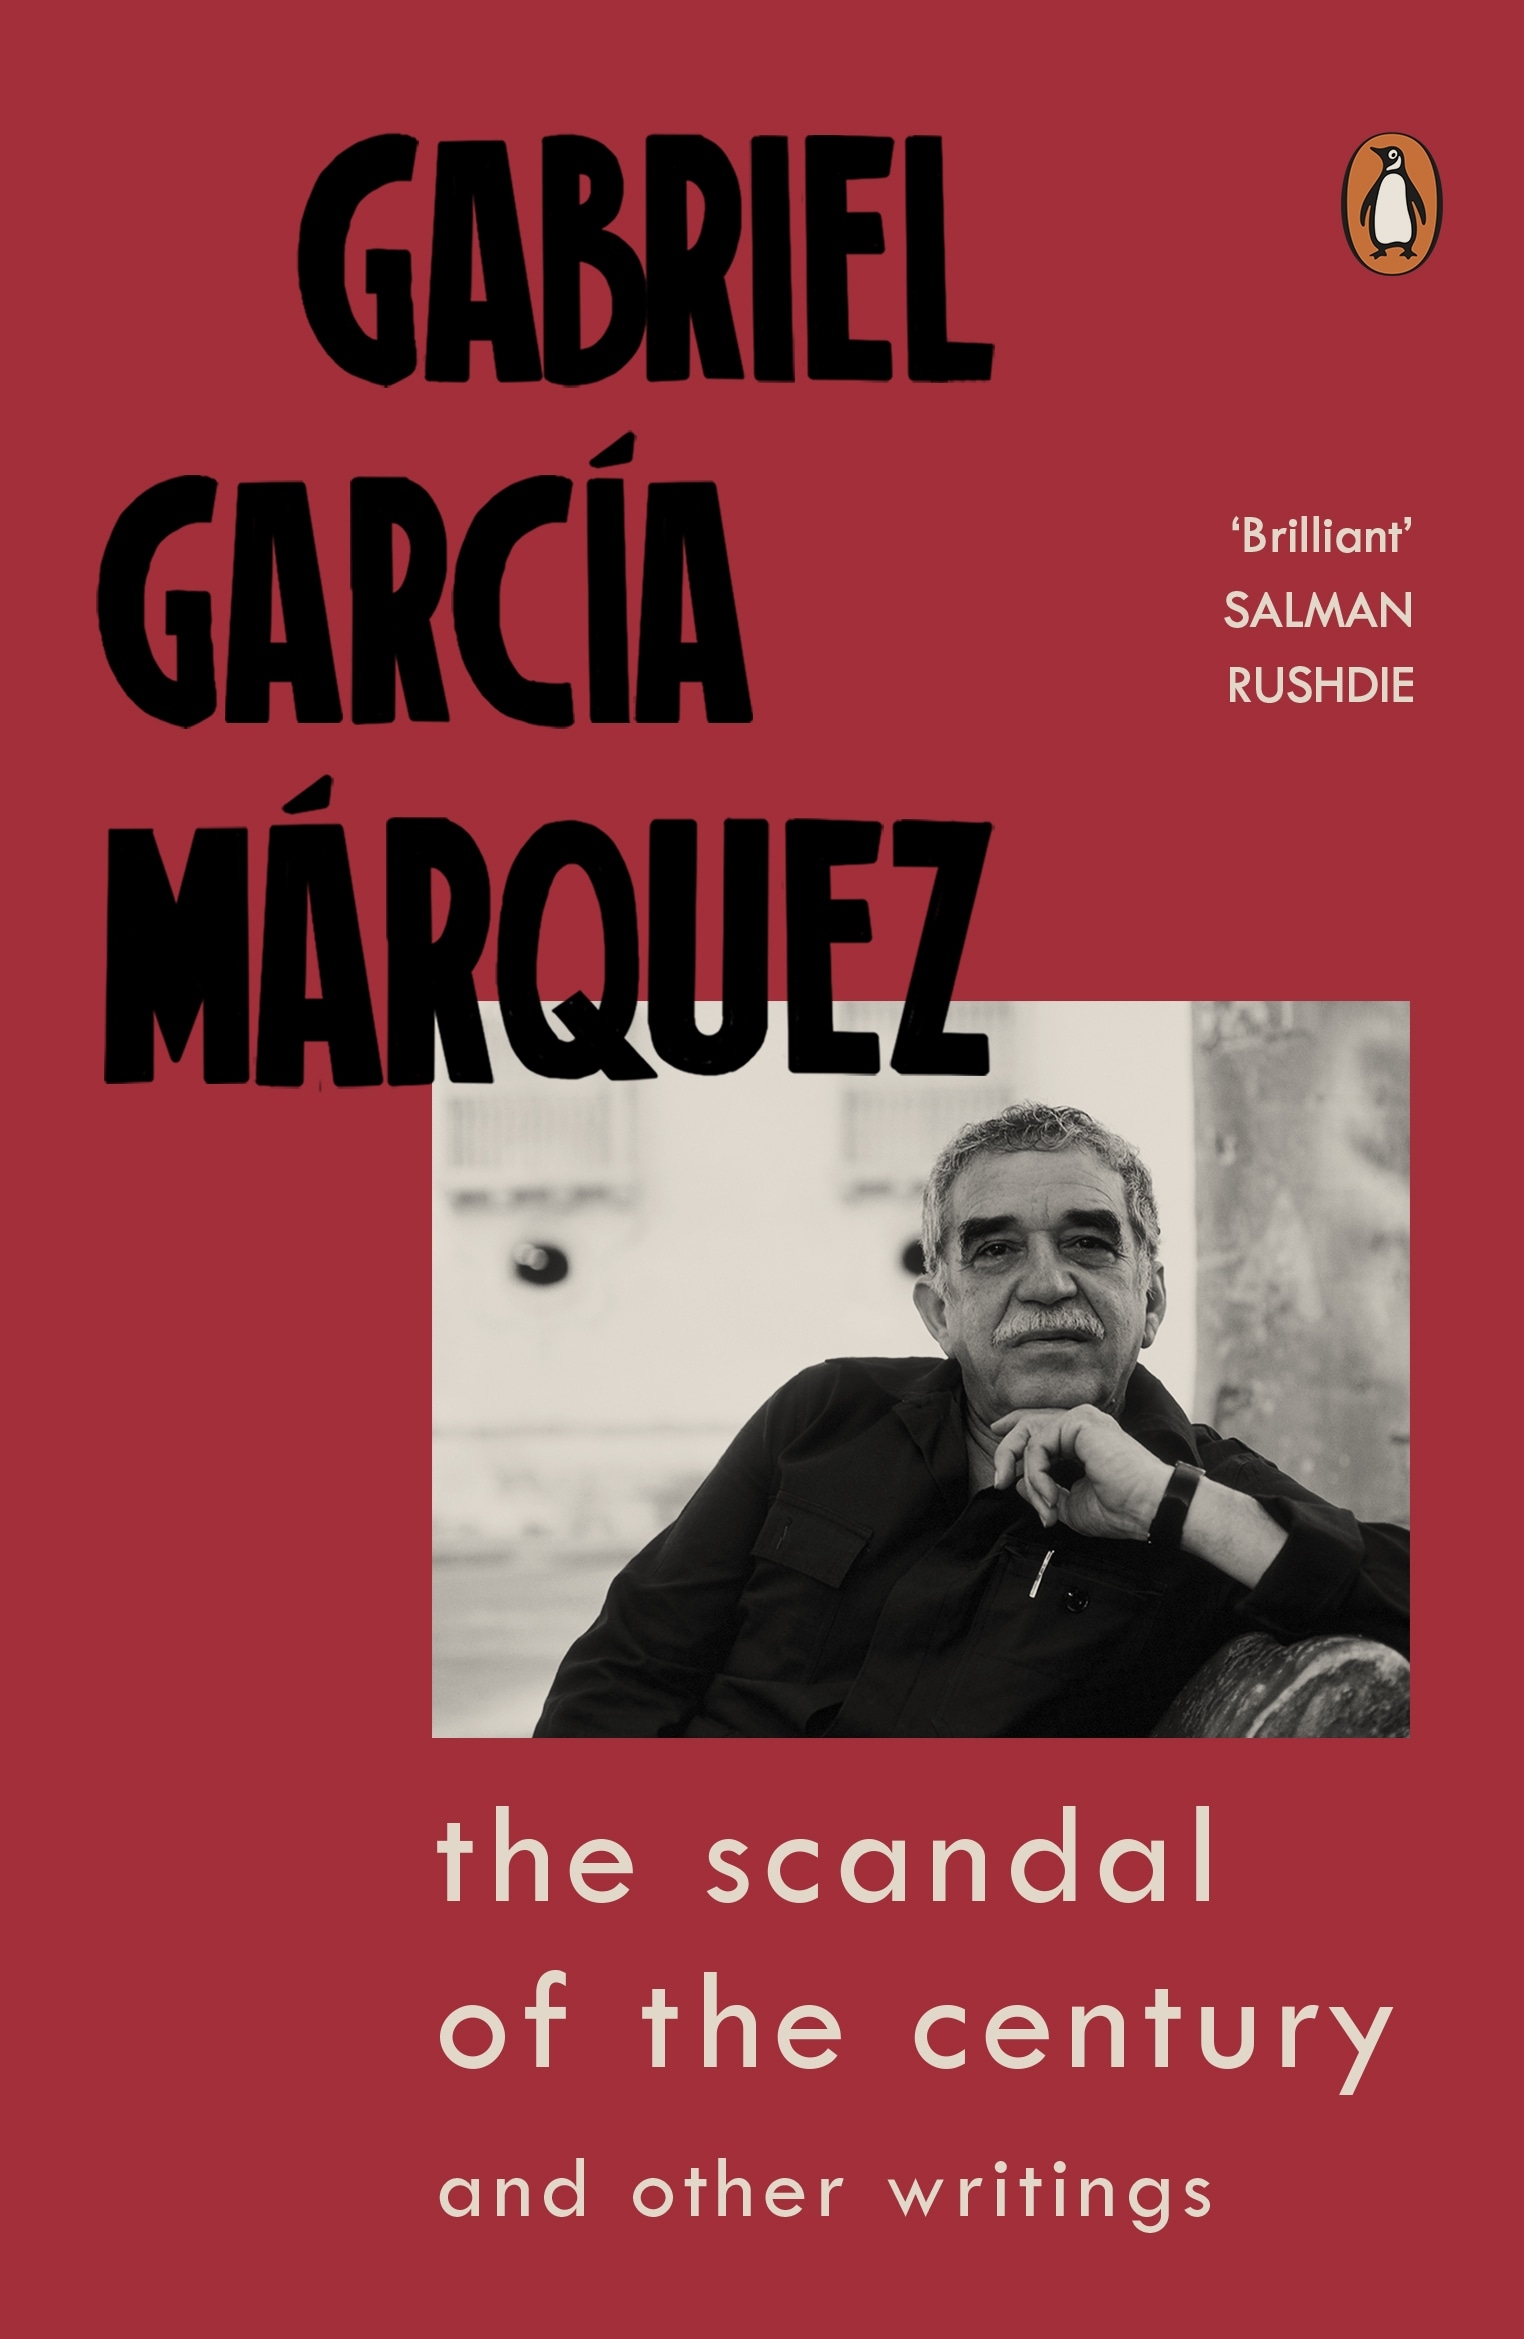 Book “The Scandal of the Century” by Gabriel Garcia Marquez — August 13, 2020